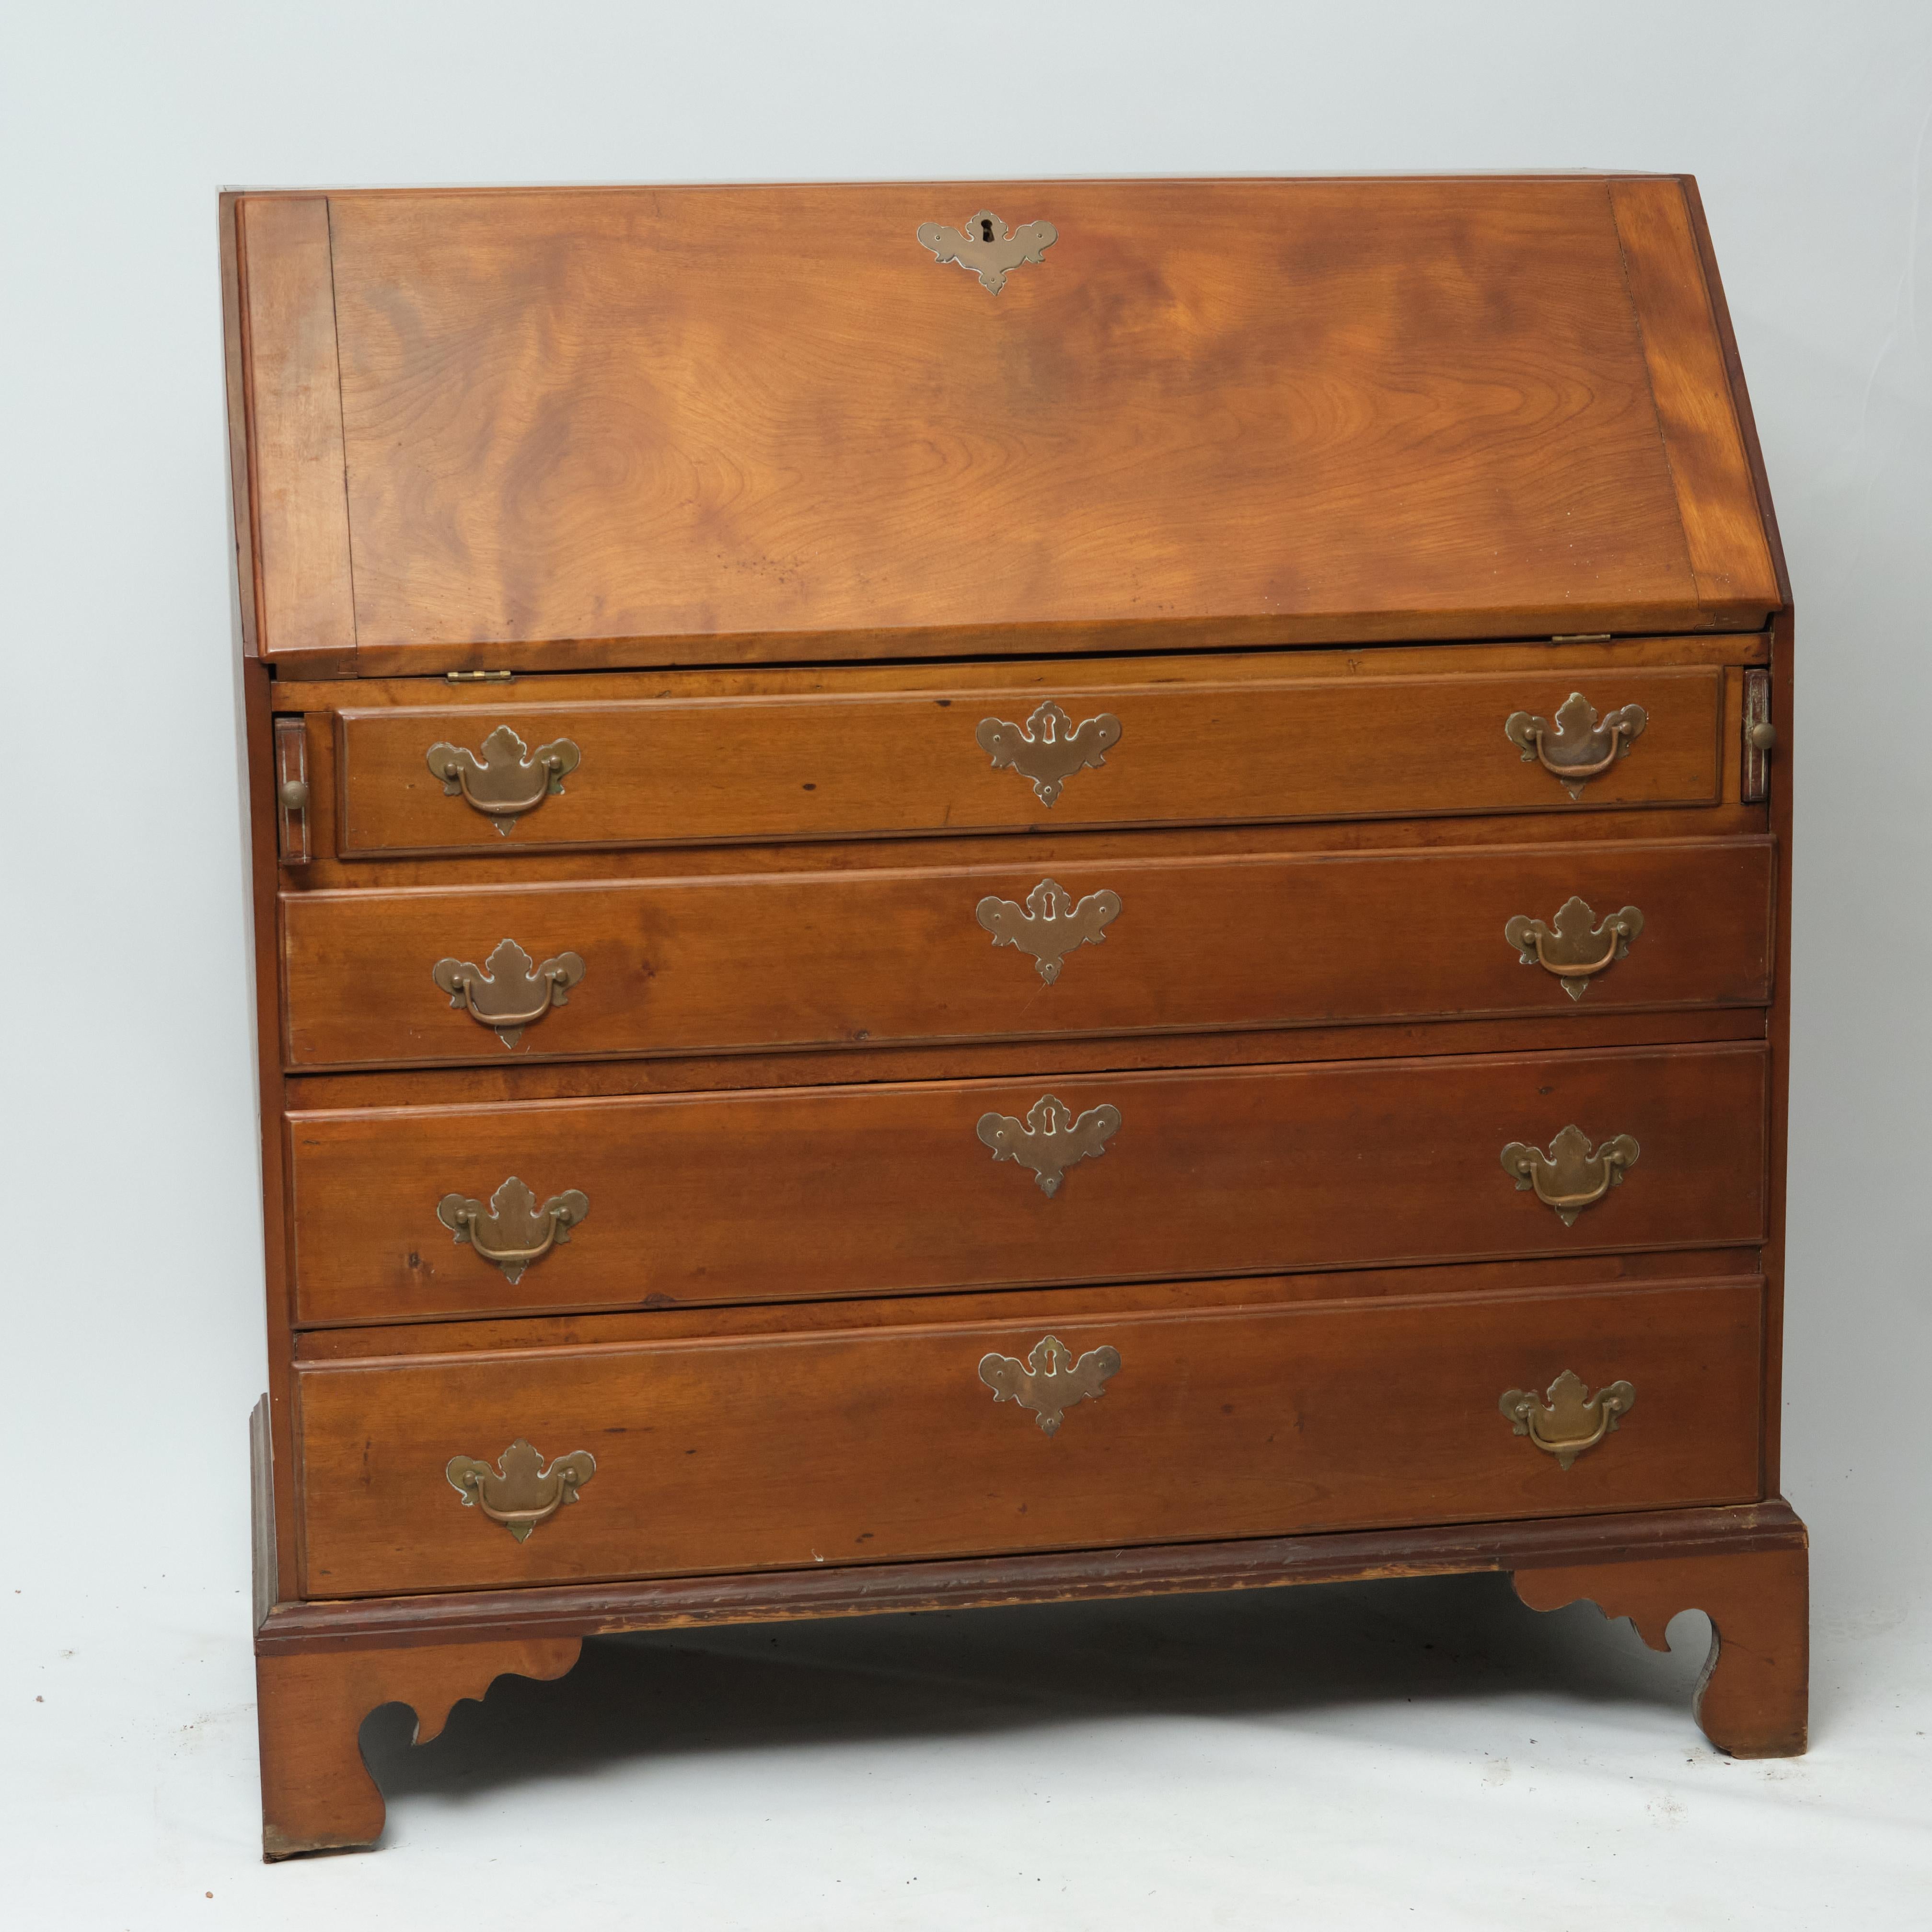 Late 18th/early 19th century American Chippendale slant-front desk in maple. Slant front with lock opens to fitted interior, having two central drawers with carved rosettes. Over four drawers with brass pulls. None of the drawers are locking. Raised